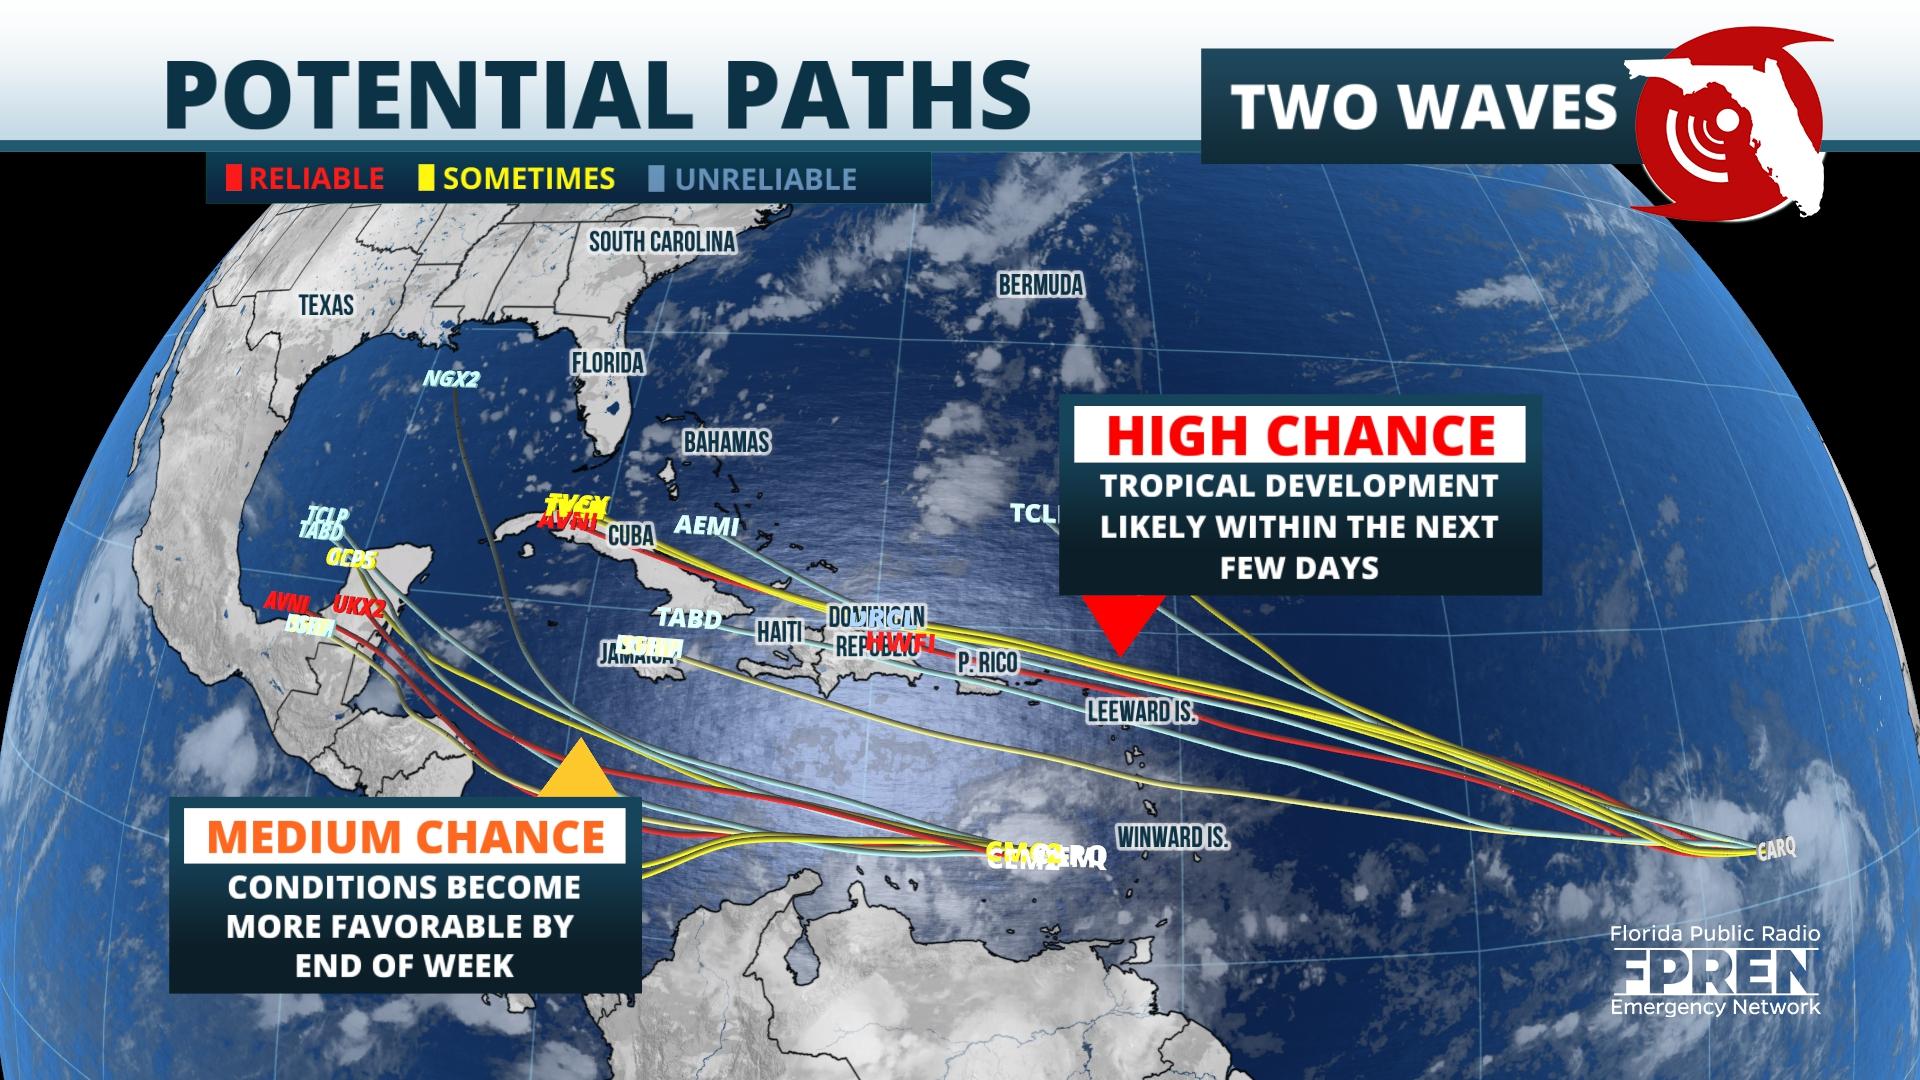 Two potential tropical storms could develop in the Atlantic